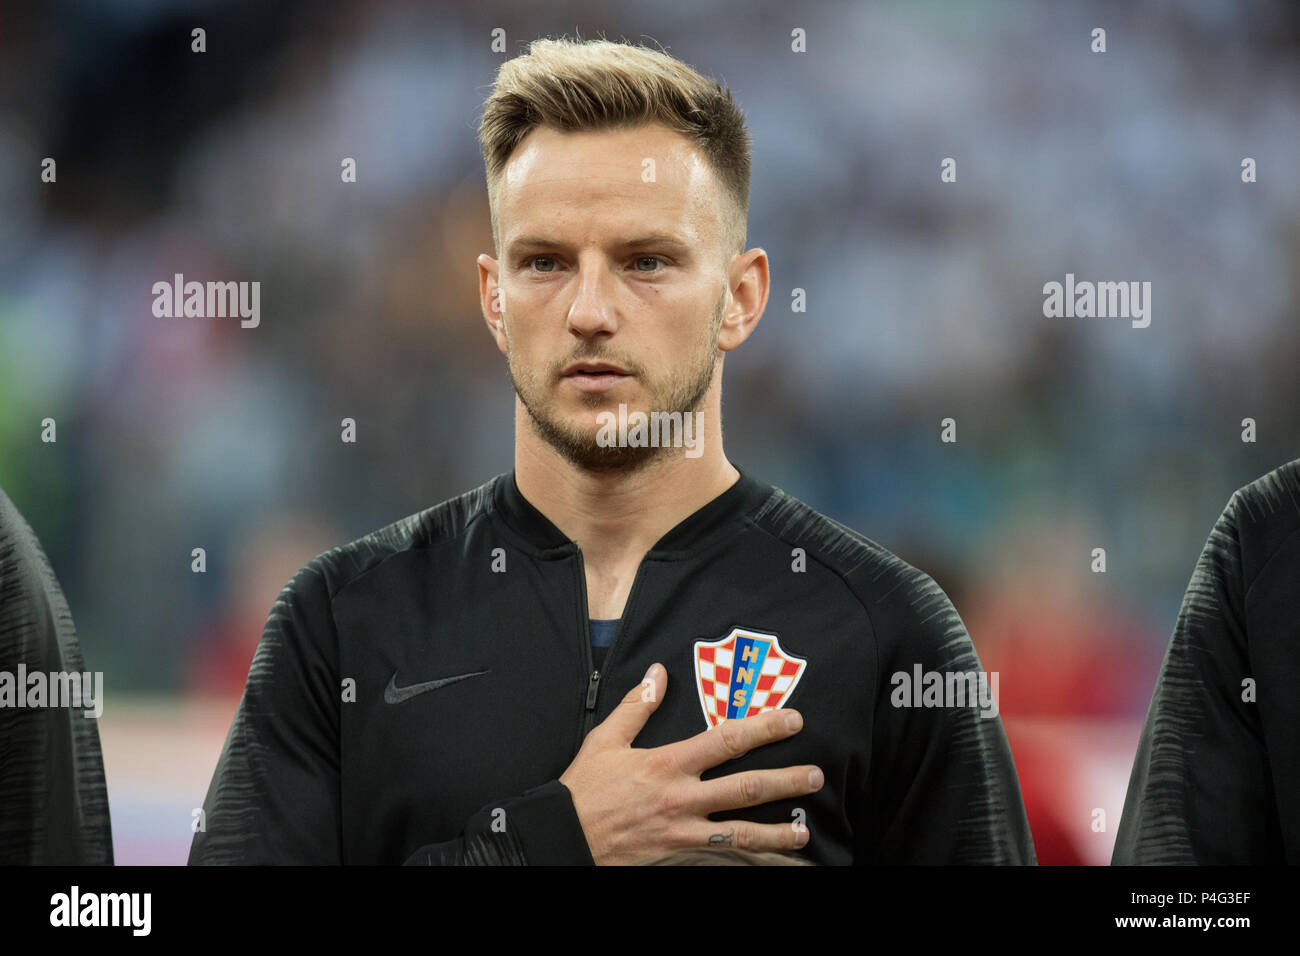 Nizhny Novgorod, Russia. 21 June 2018.  Ivan RAKITIC (CRO) sings the national anthem with, singing, Presentation, Prsssentation, Line up, Lineup, Half-length portrait, Argentina (ARG) - Croatia (CRO) 0: 3, Preliminary Round, Group D, Match 23, on 21.06.2018 in Moscow ; Football World Cup 2018 in Russia from 14.06. - 15.07.2018. | usage worldwide Credit: dpa/Alamy Live News Credit: dpa picture alliance/Alamy Live News Stock Photo